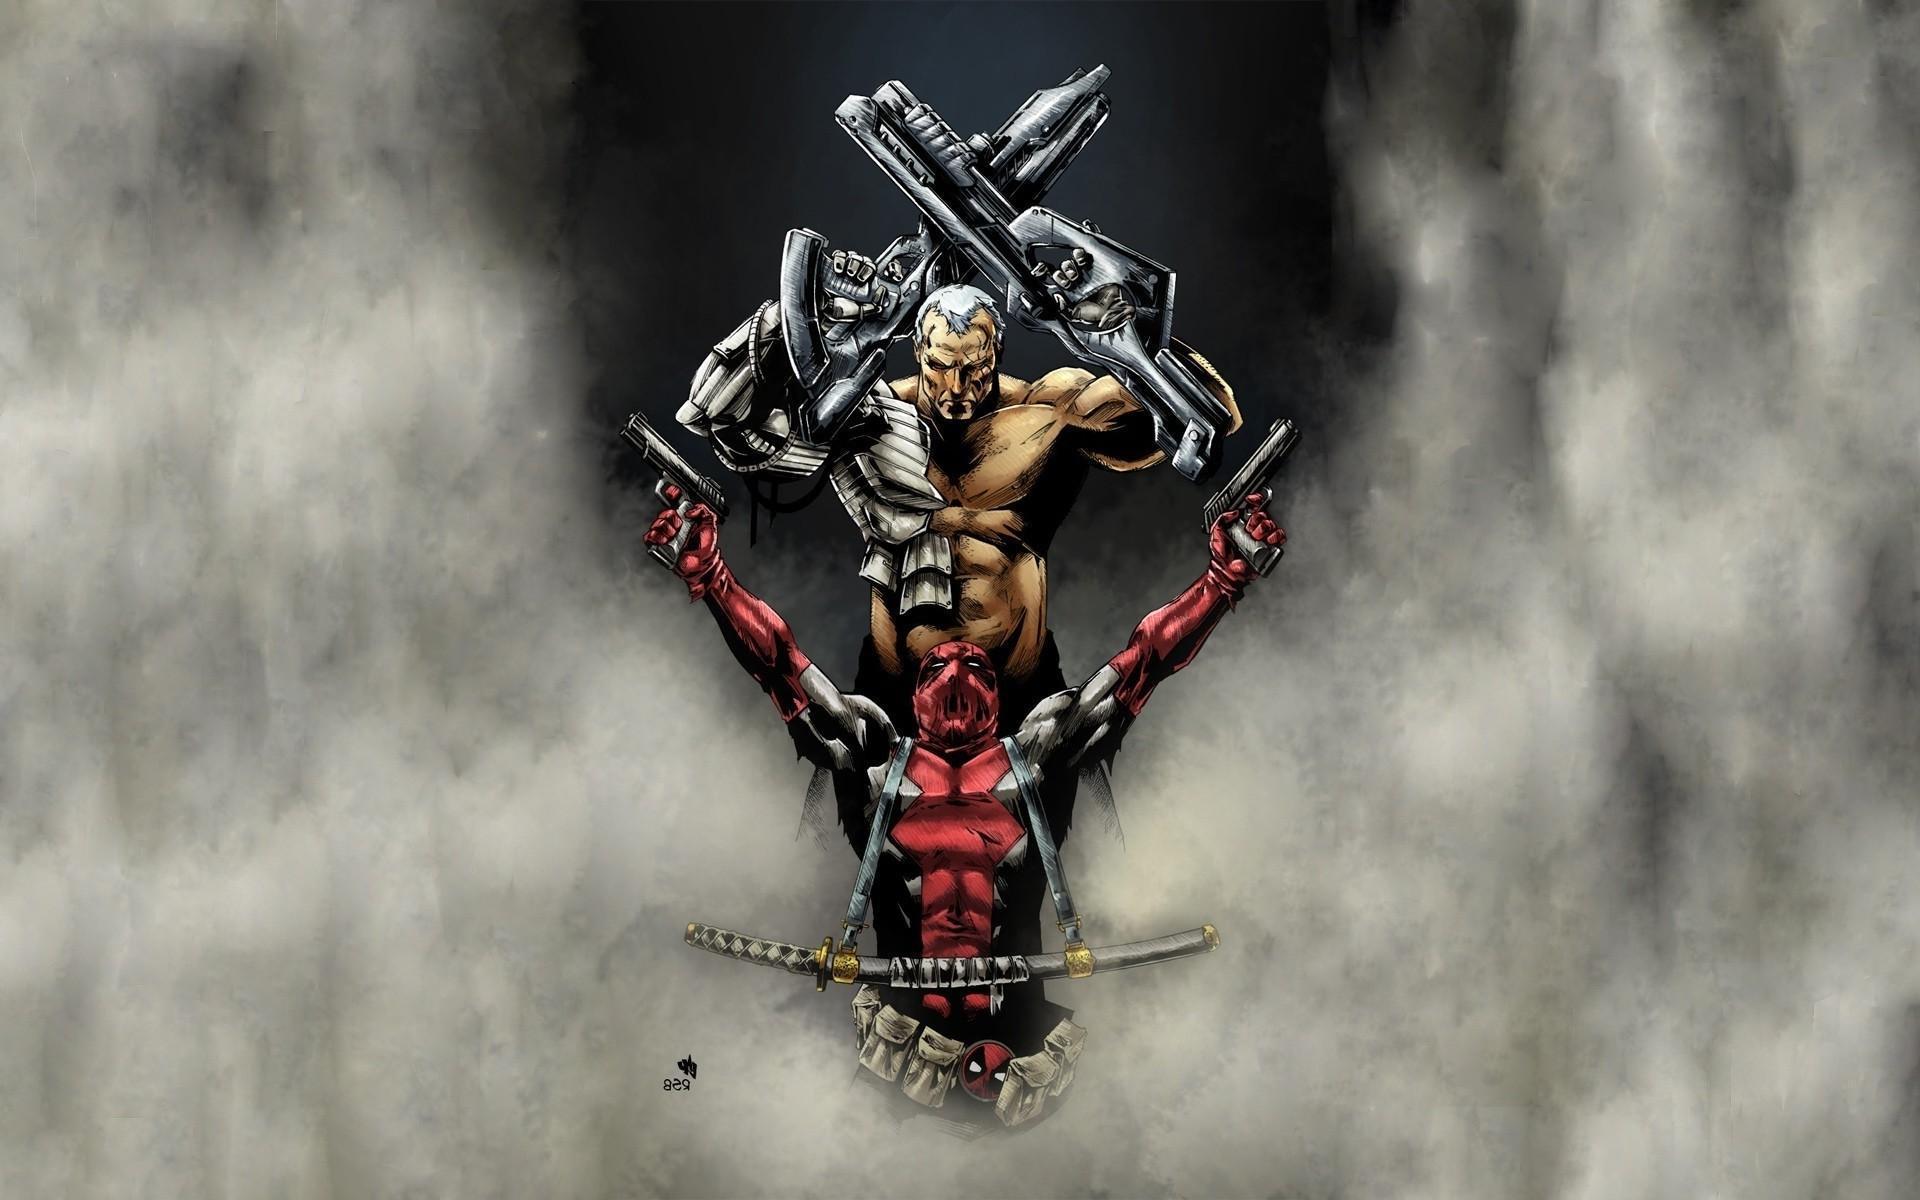 Download the Deadpool and Colossus Wallpaper, Deadpool